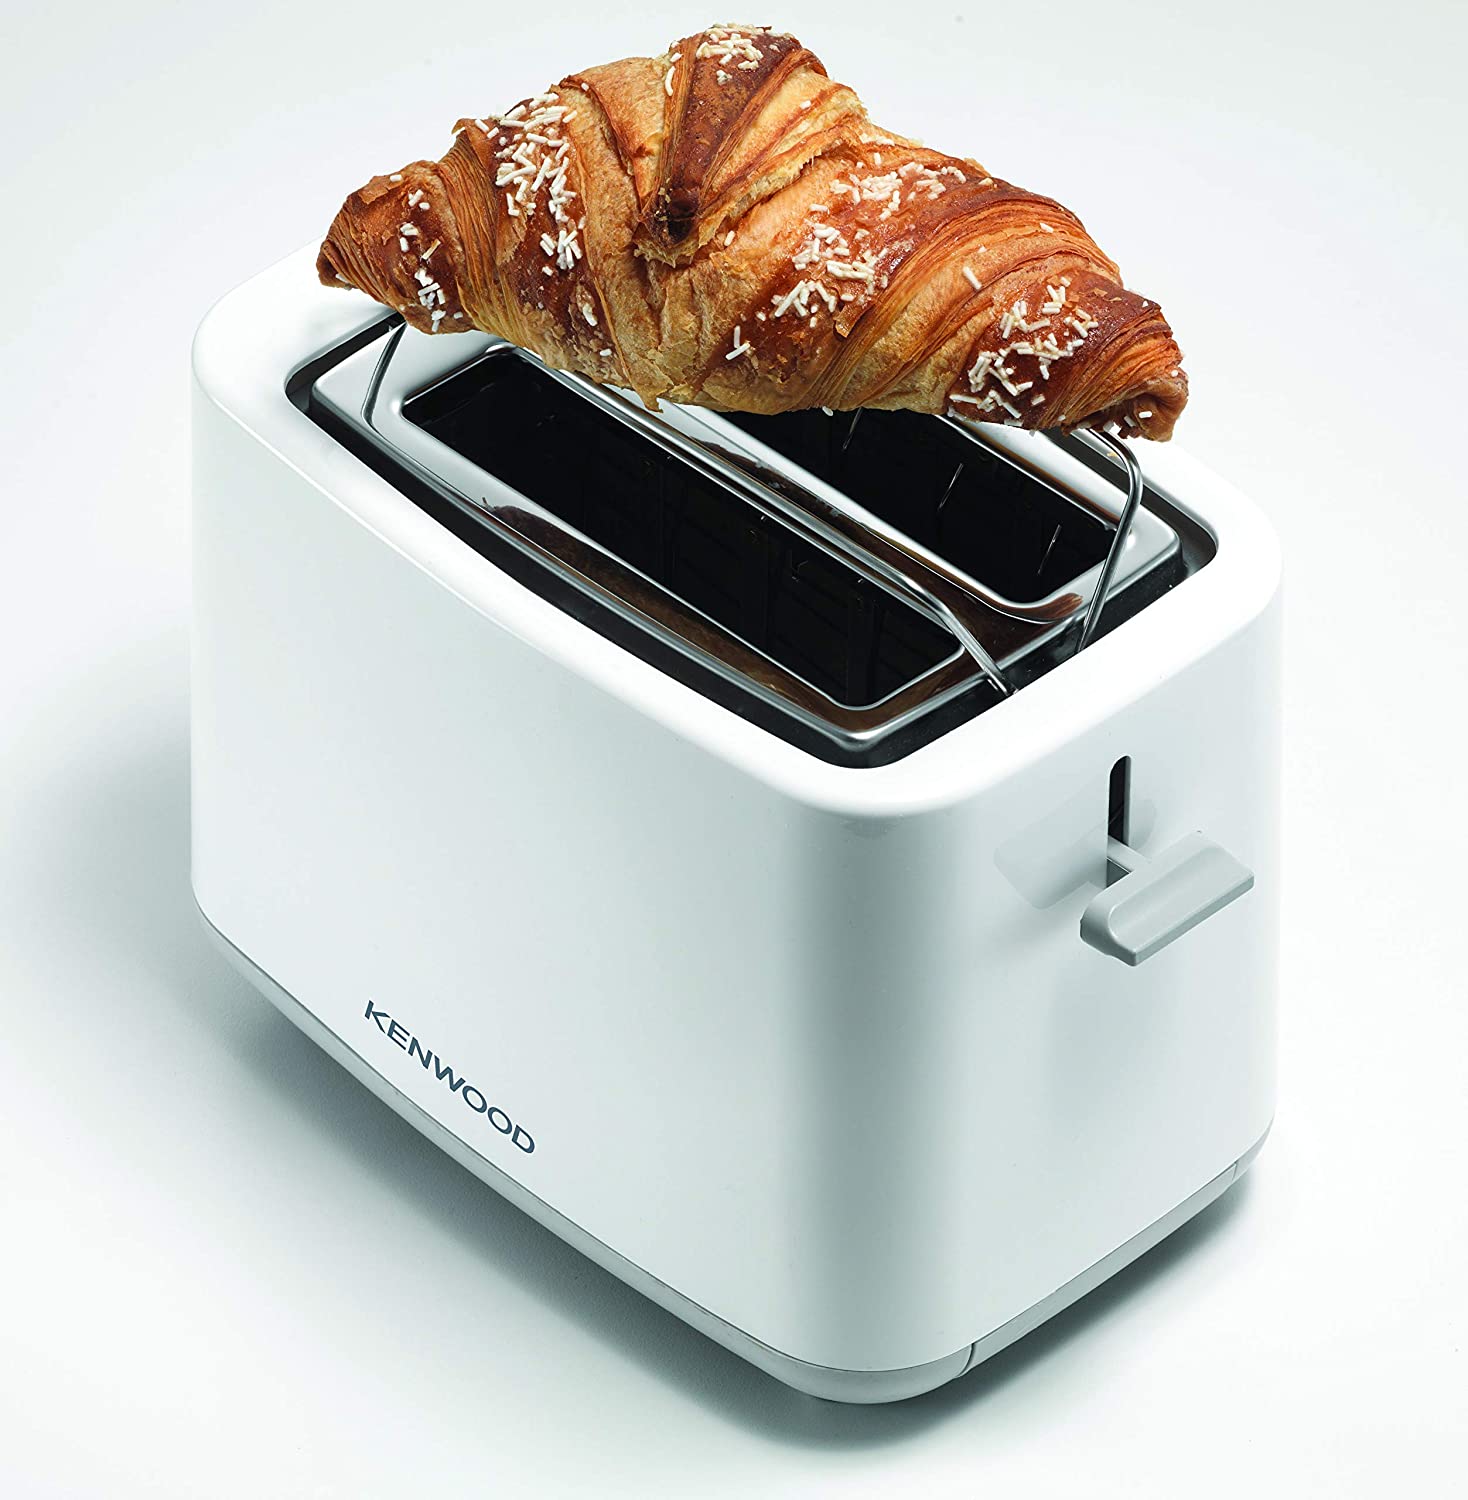 Kenwood 2 Slice Toaster Stylish Design To Compliment Any Kitchen, TCP01.AOWH